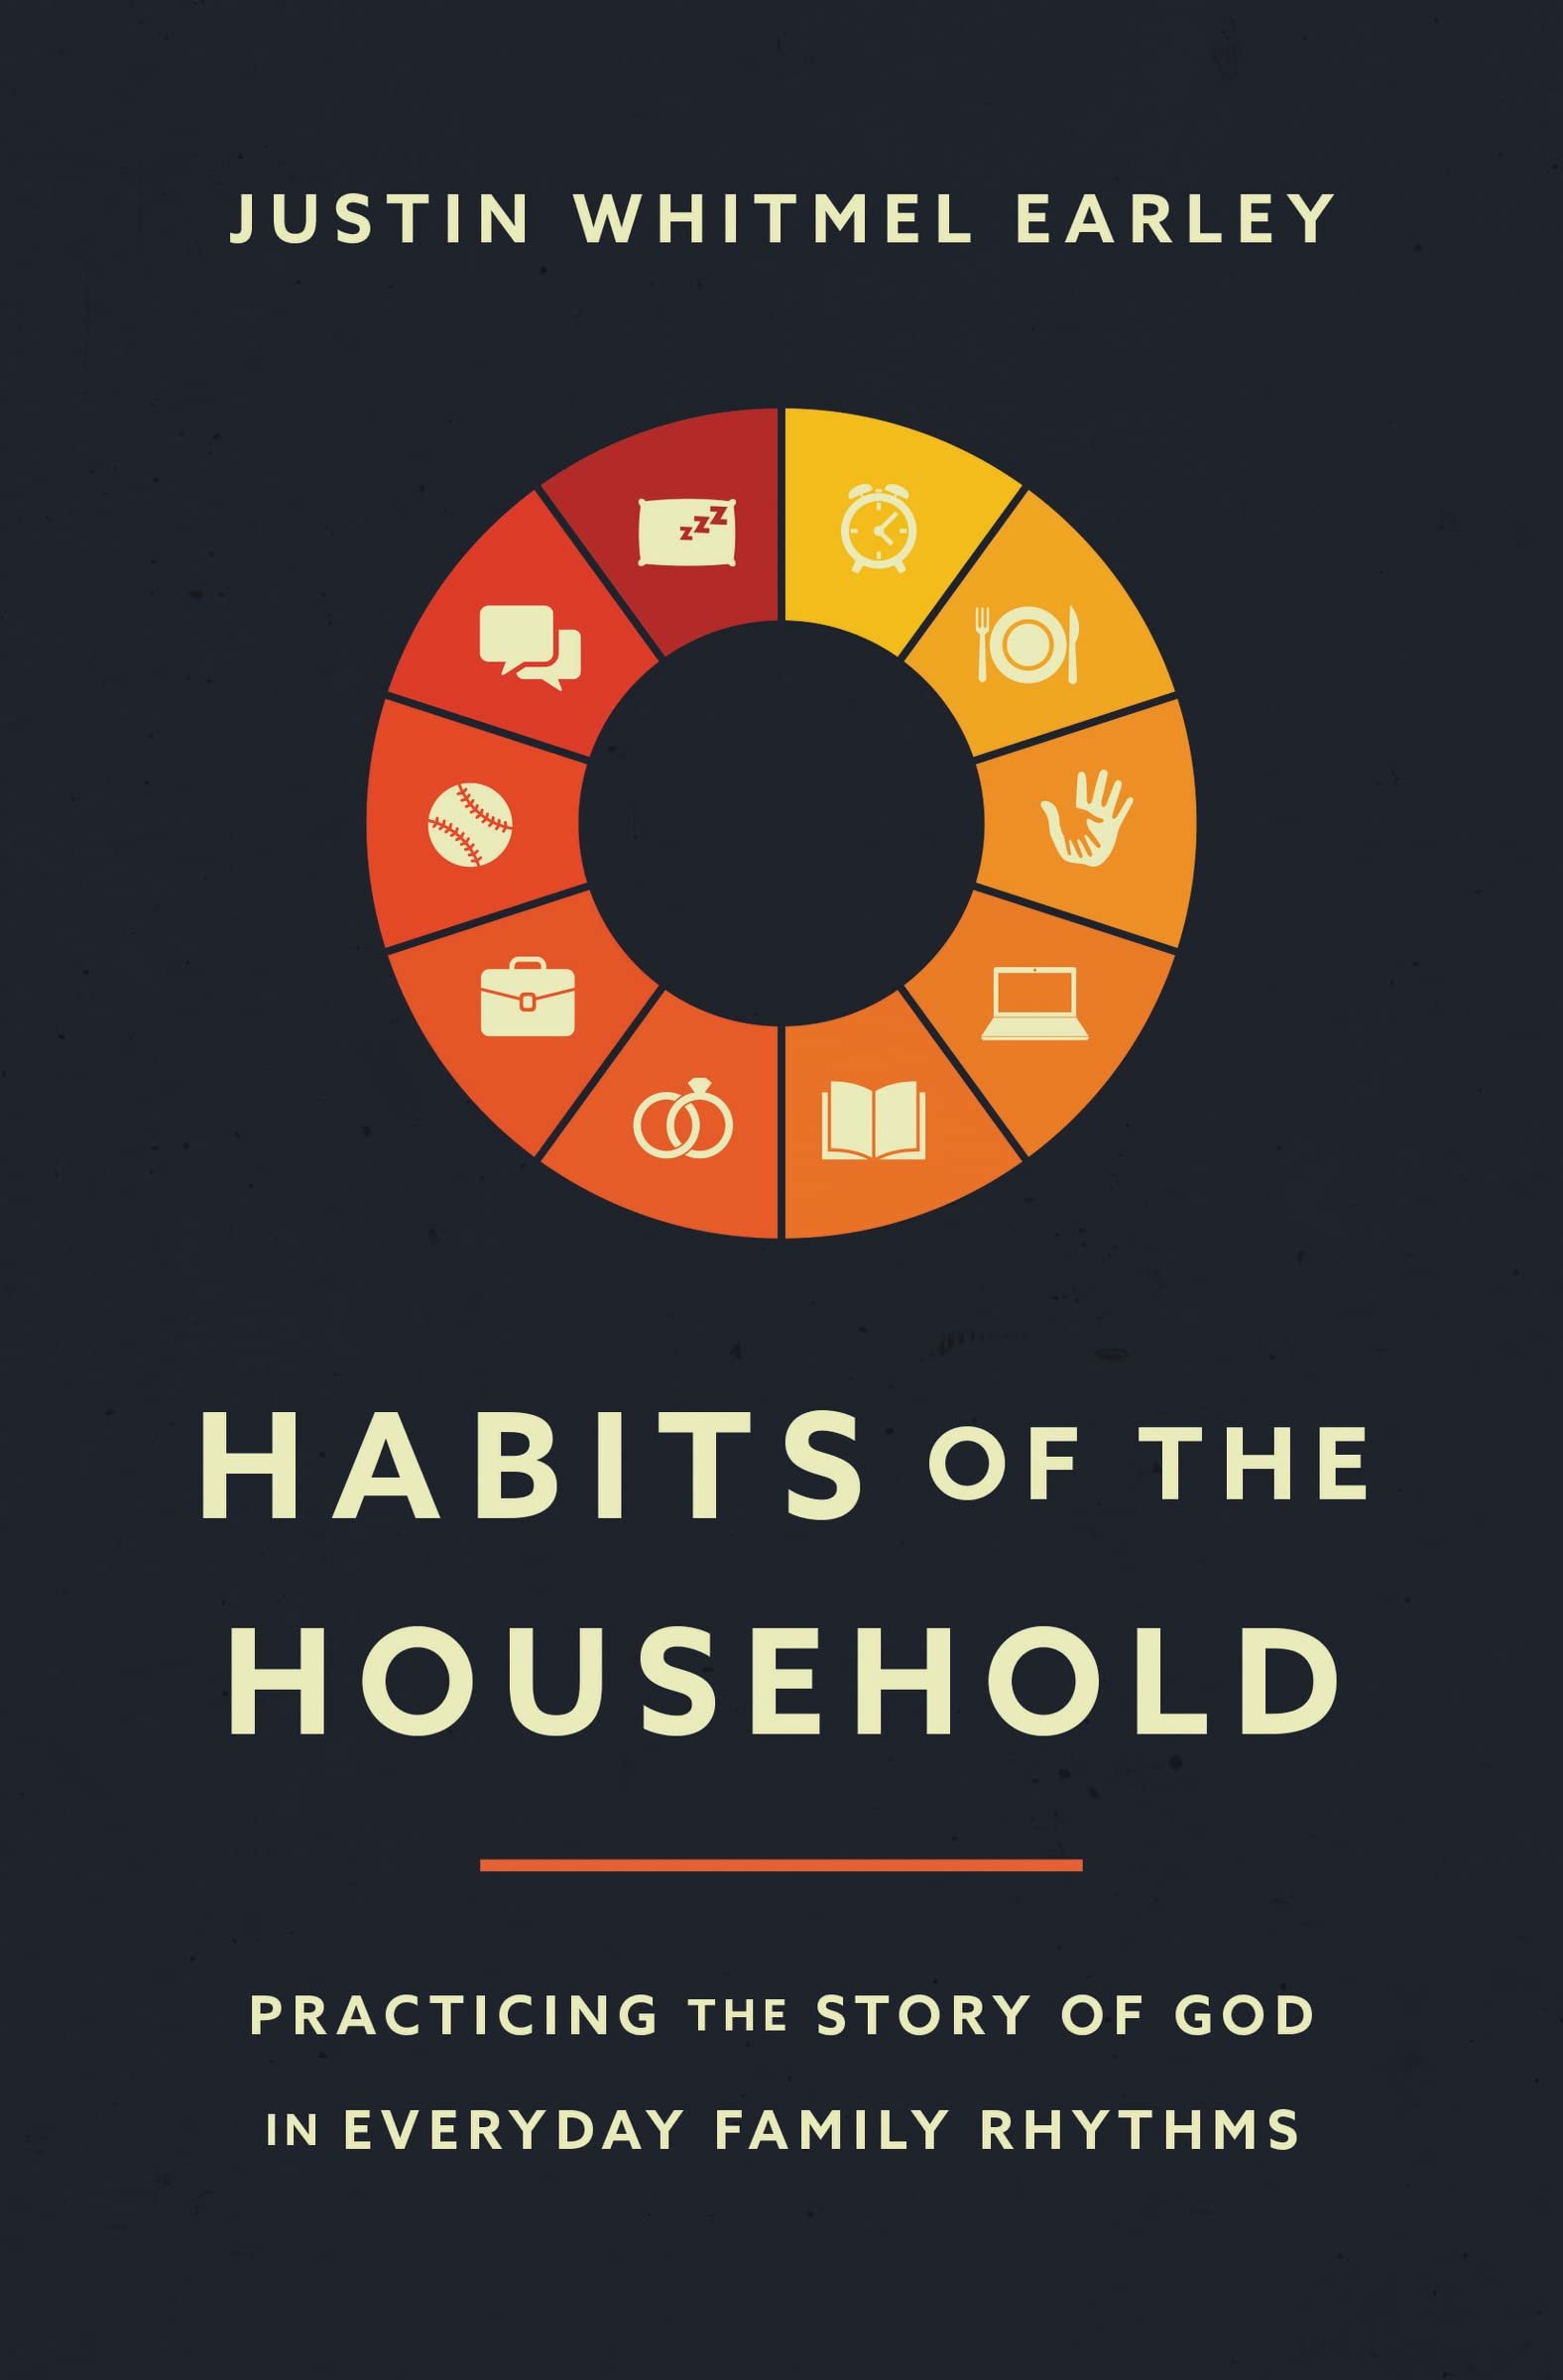 Habits of the Household- Justin Whittle Early